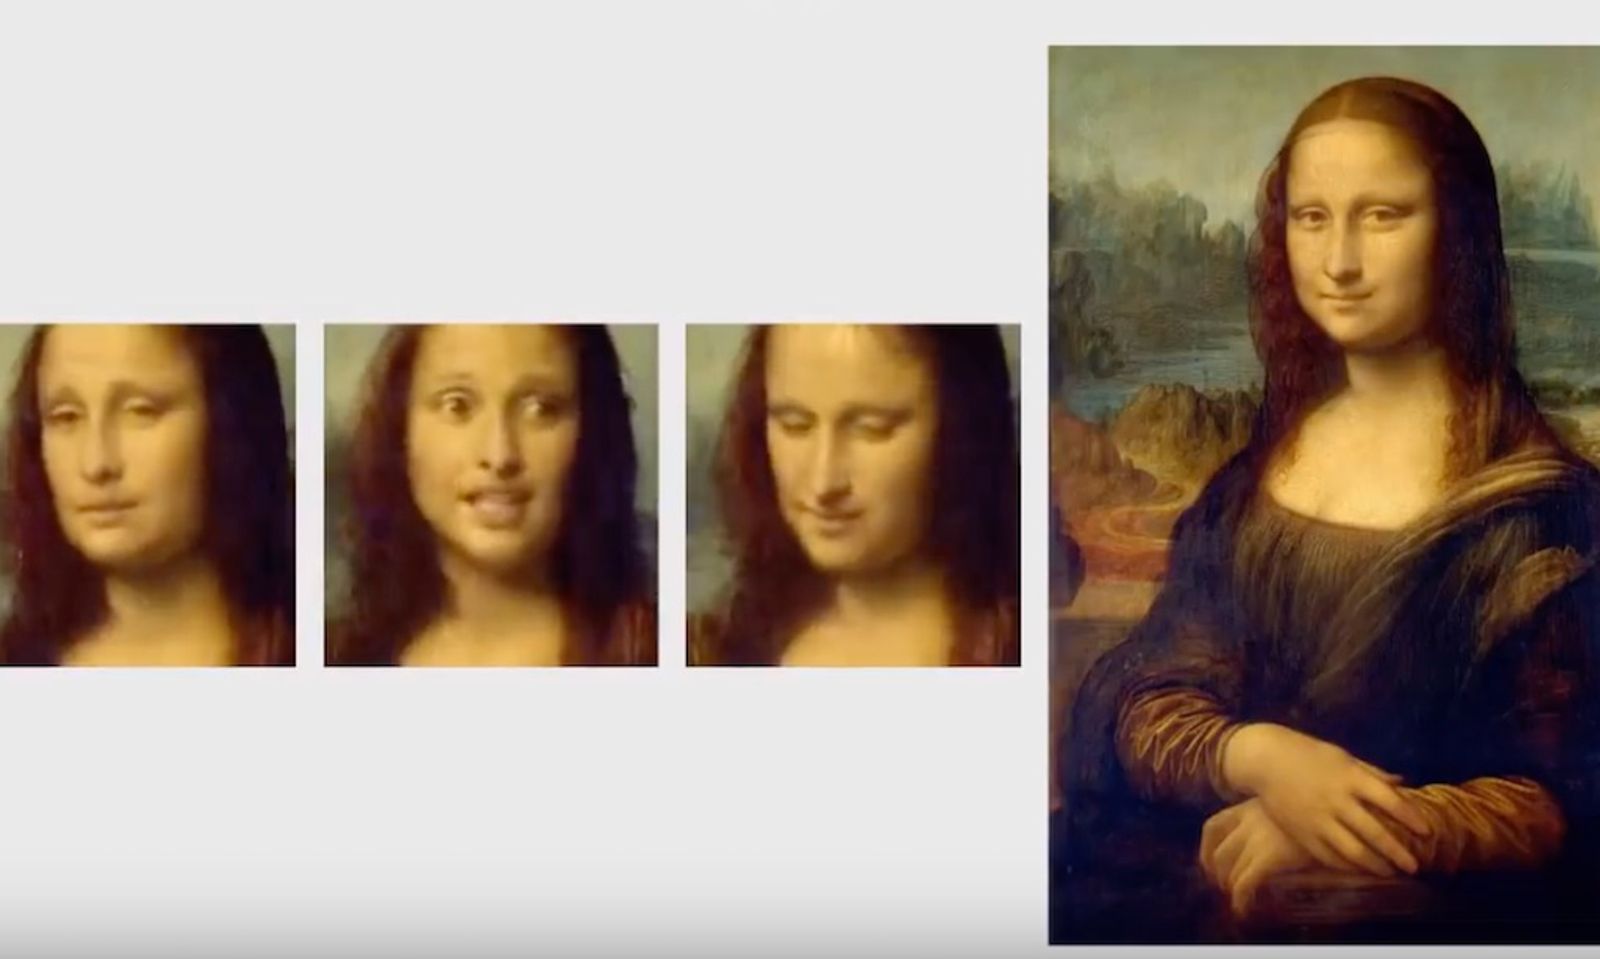 New AI Tech Makes Creating ‘Deepfakes’ Possible From Single Image